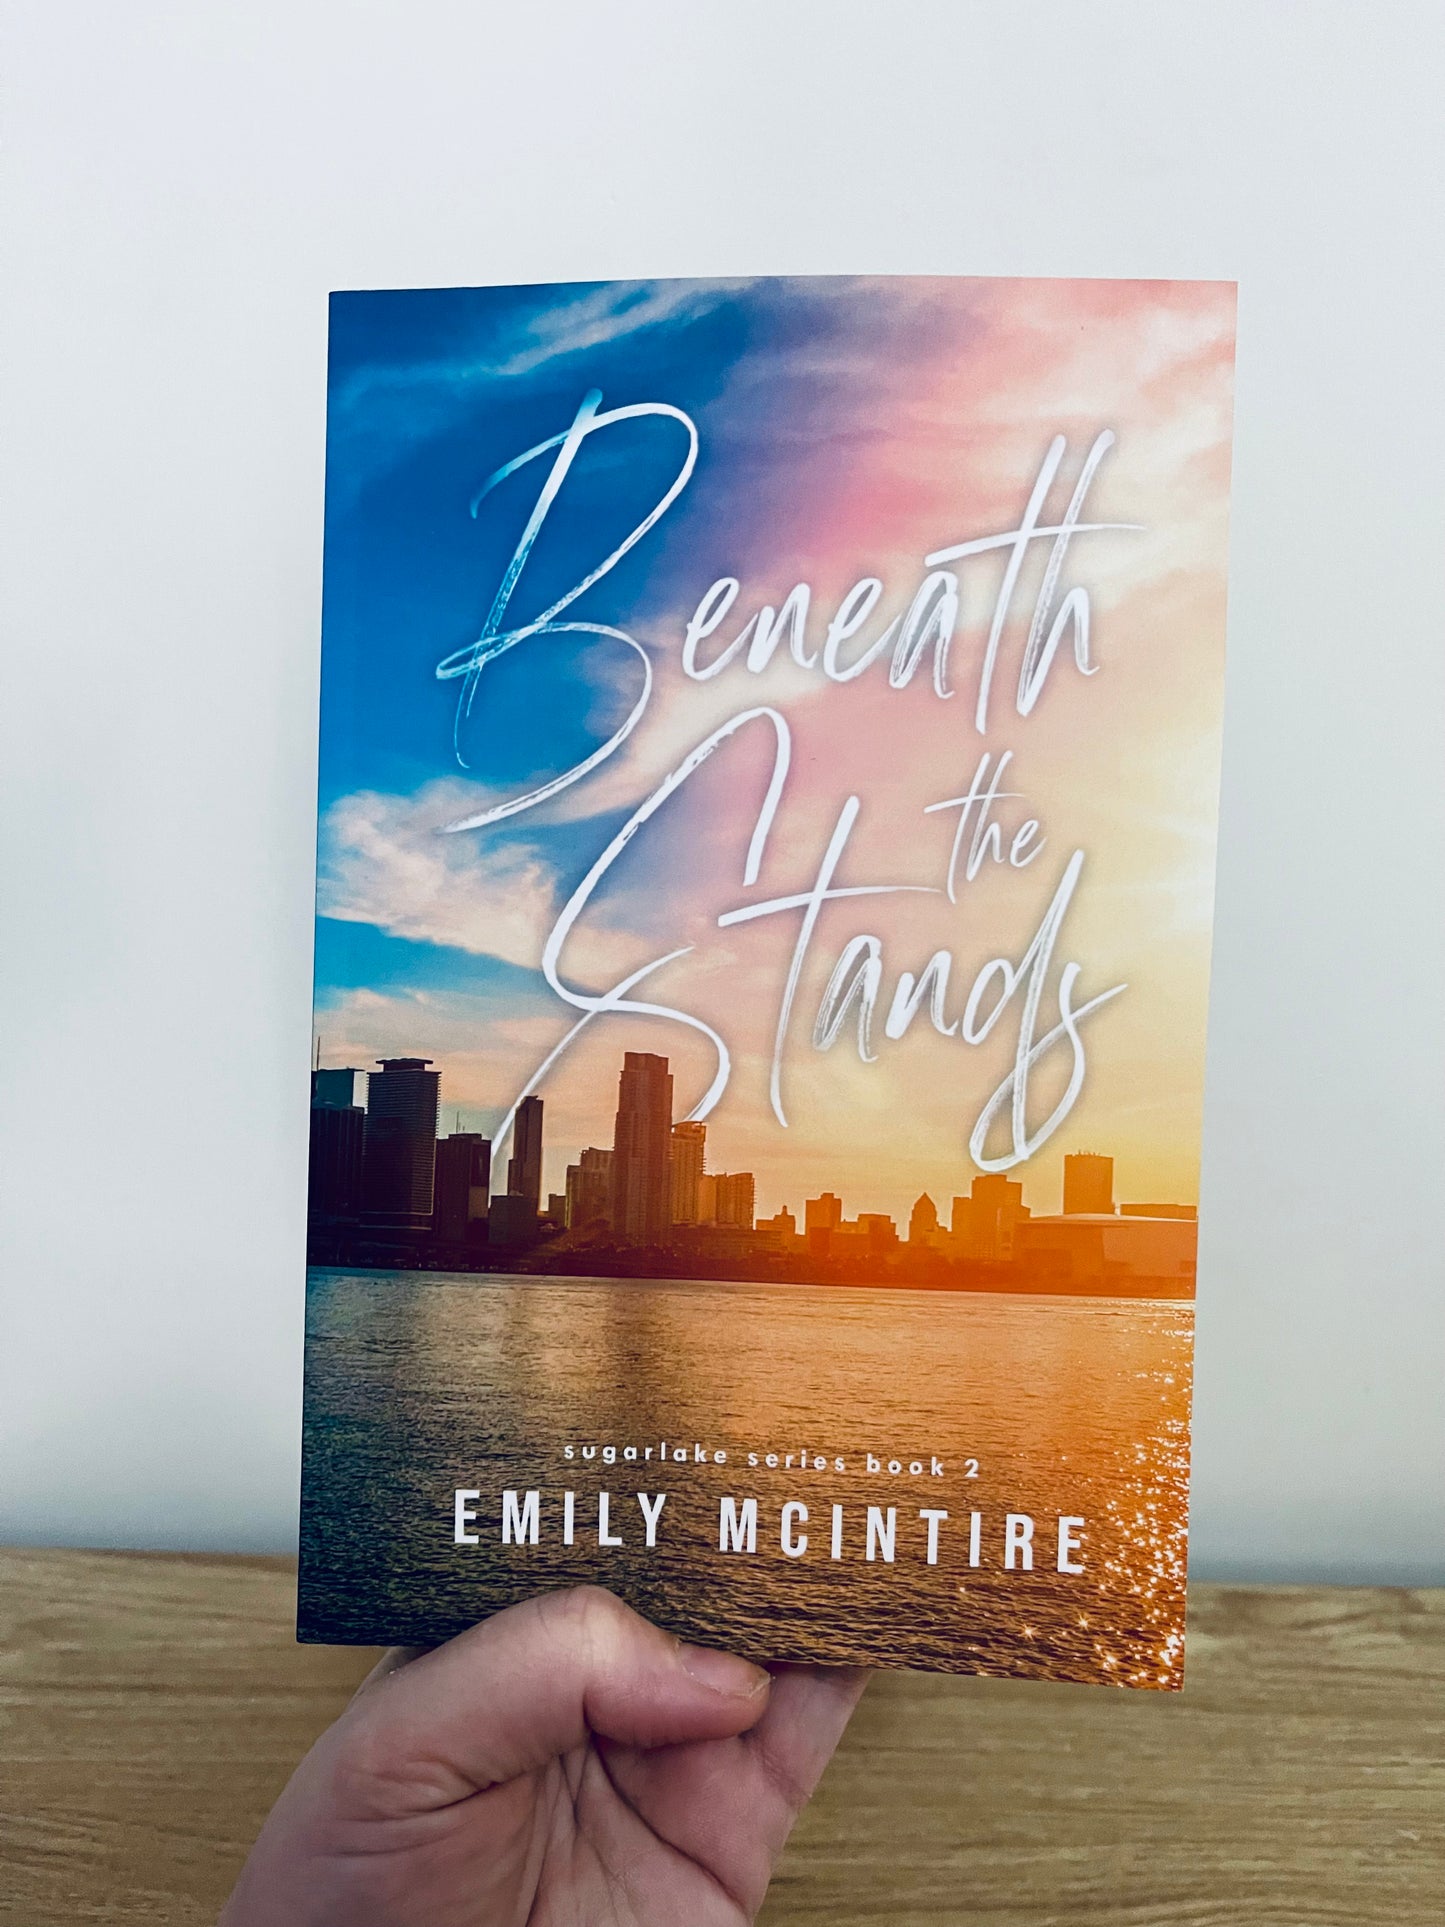 Beneath The Stands by Emily McIntire (Sugarlake #2)